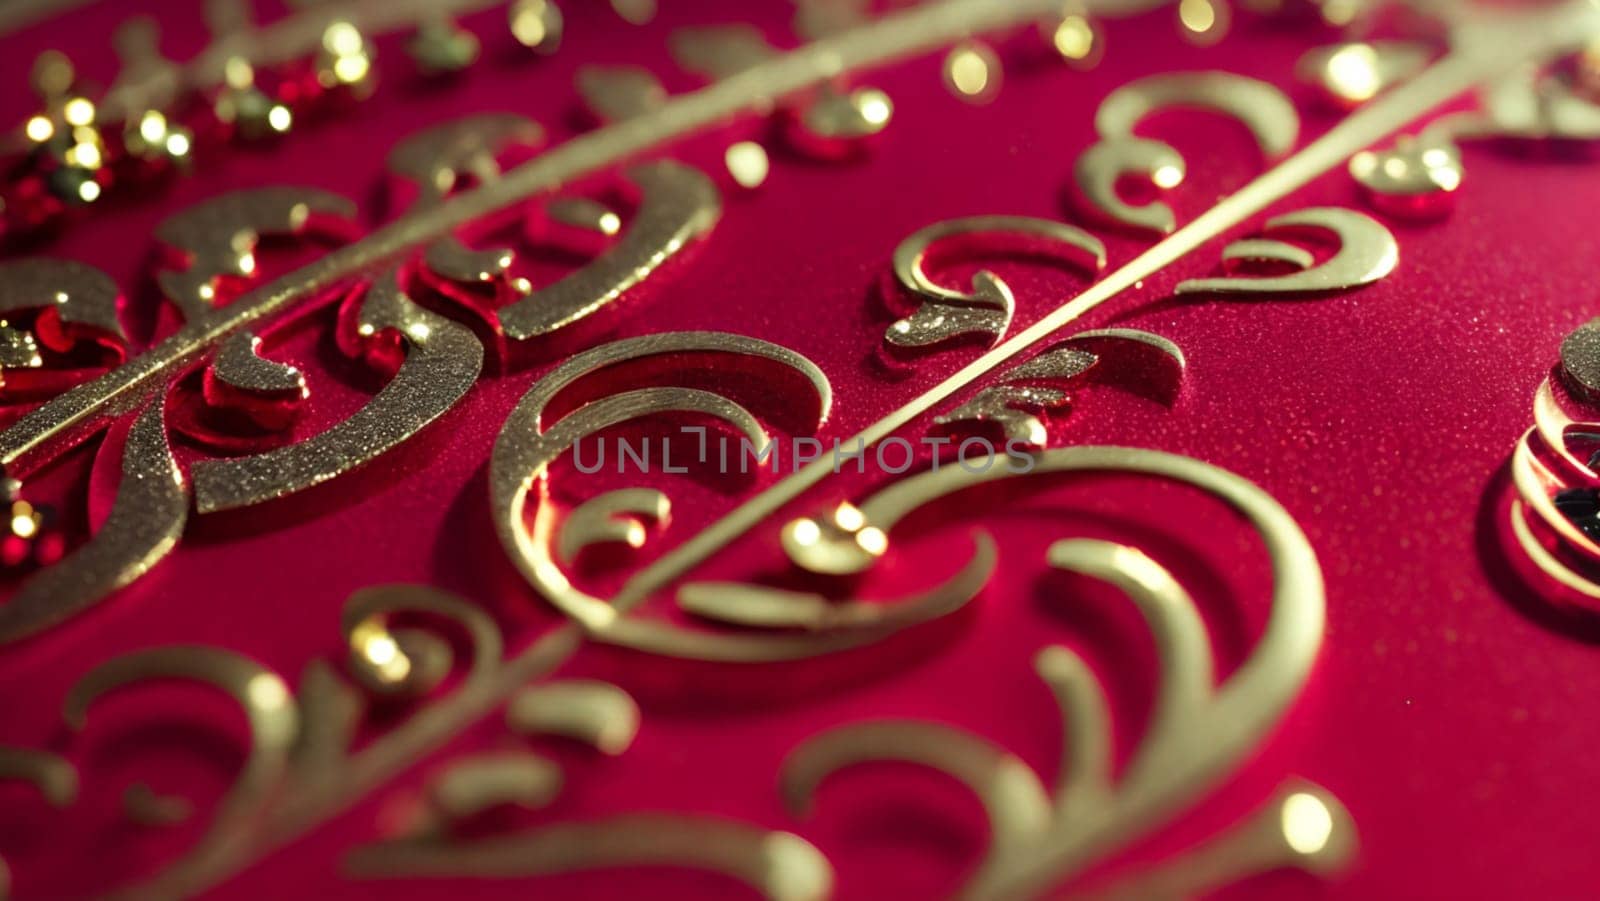 Beautiful gold metallic background with reflections and glitters and shiny fuchsia and maroon background with a luxurious decorative look with ornaments. by XabiDonostia